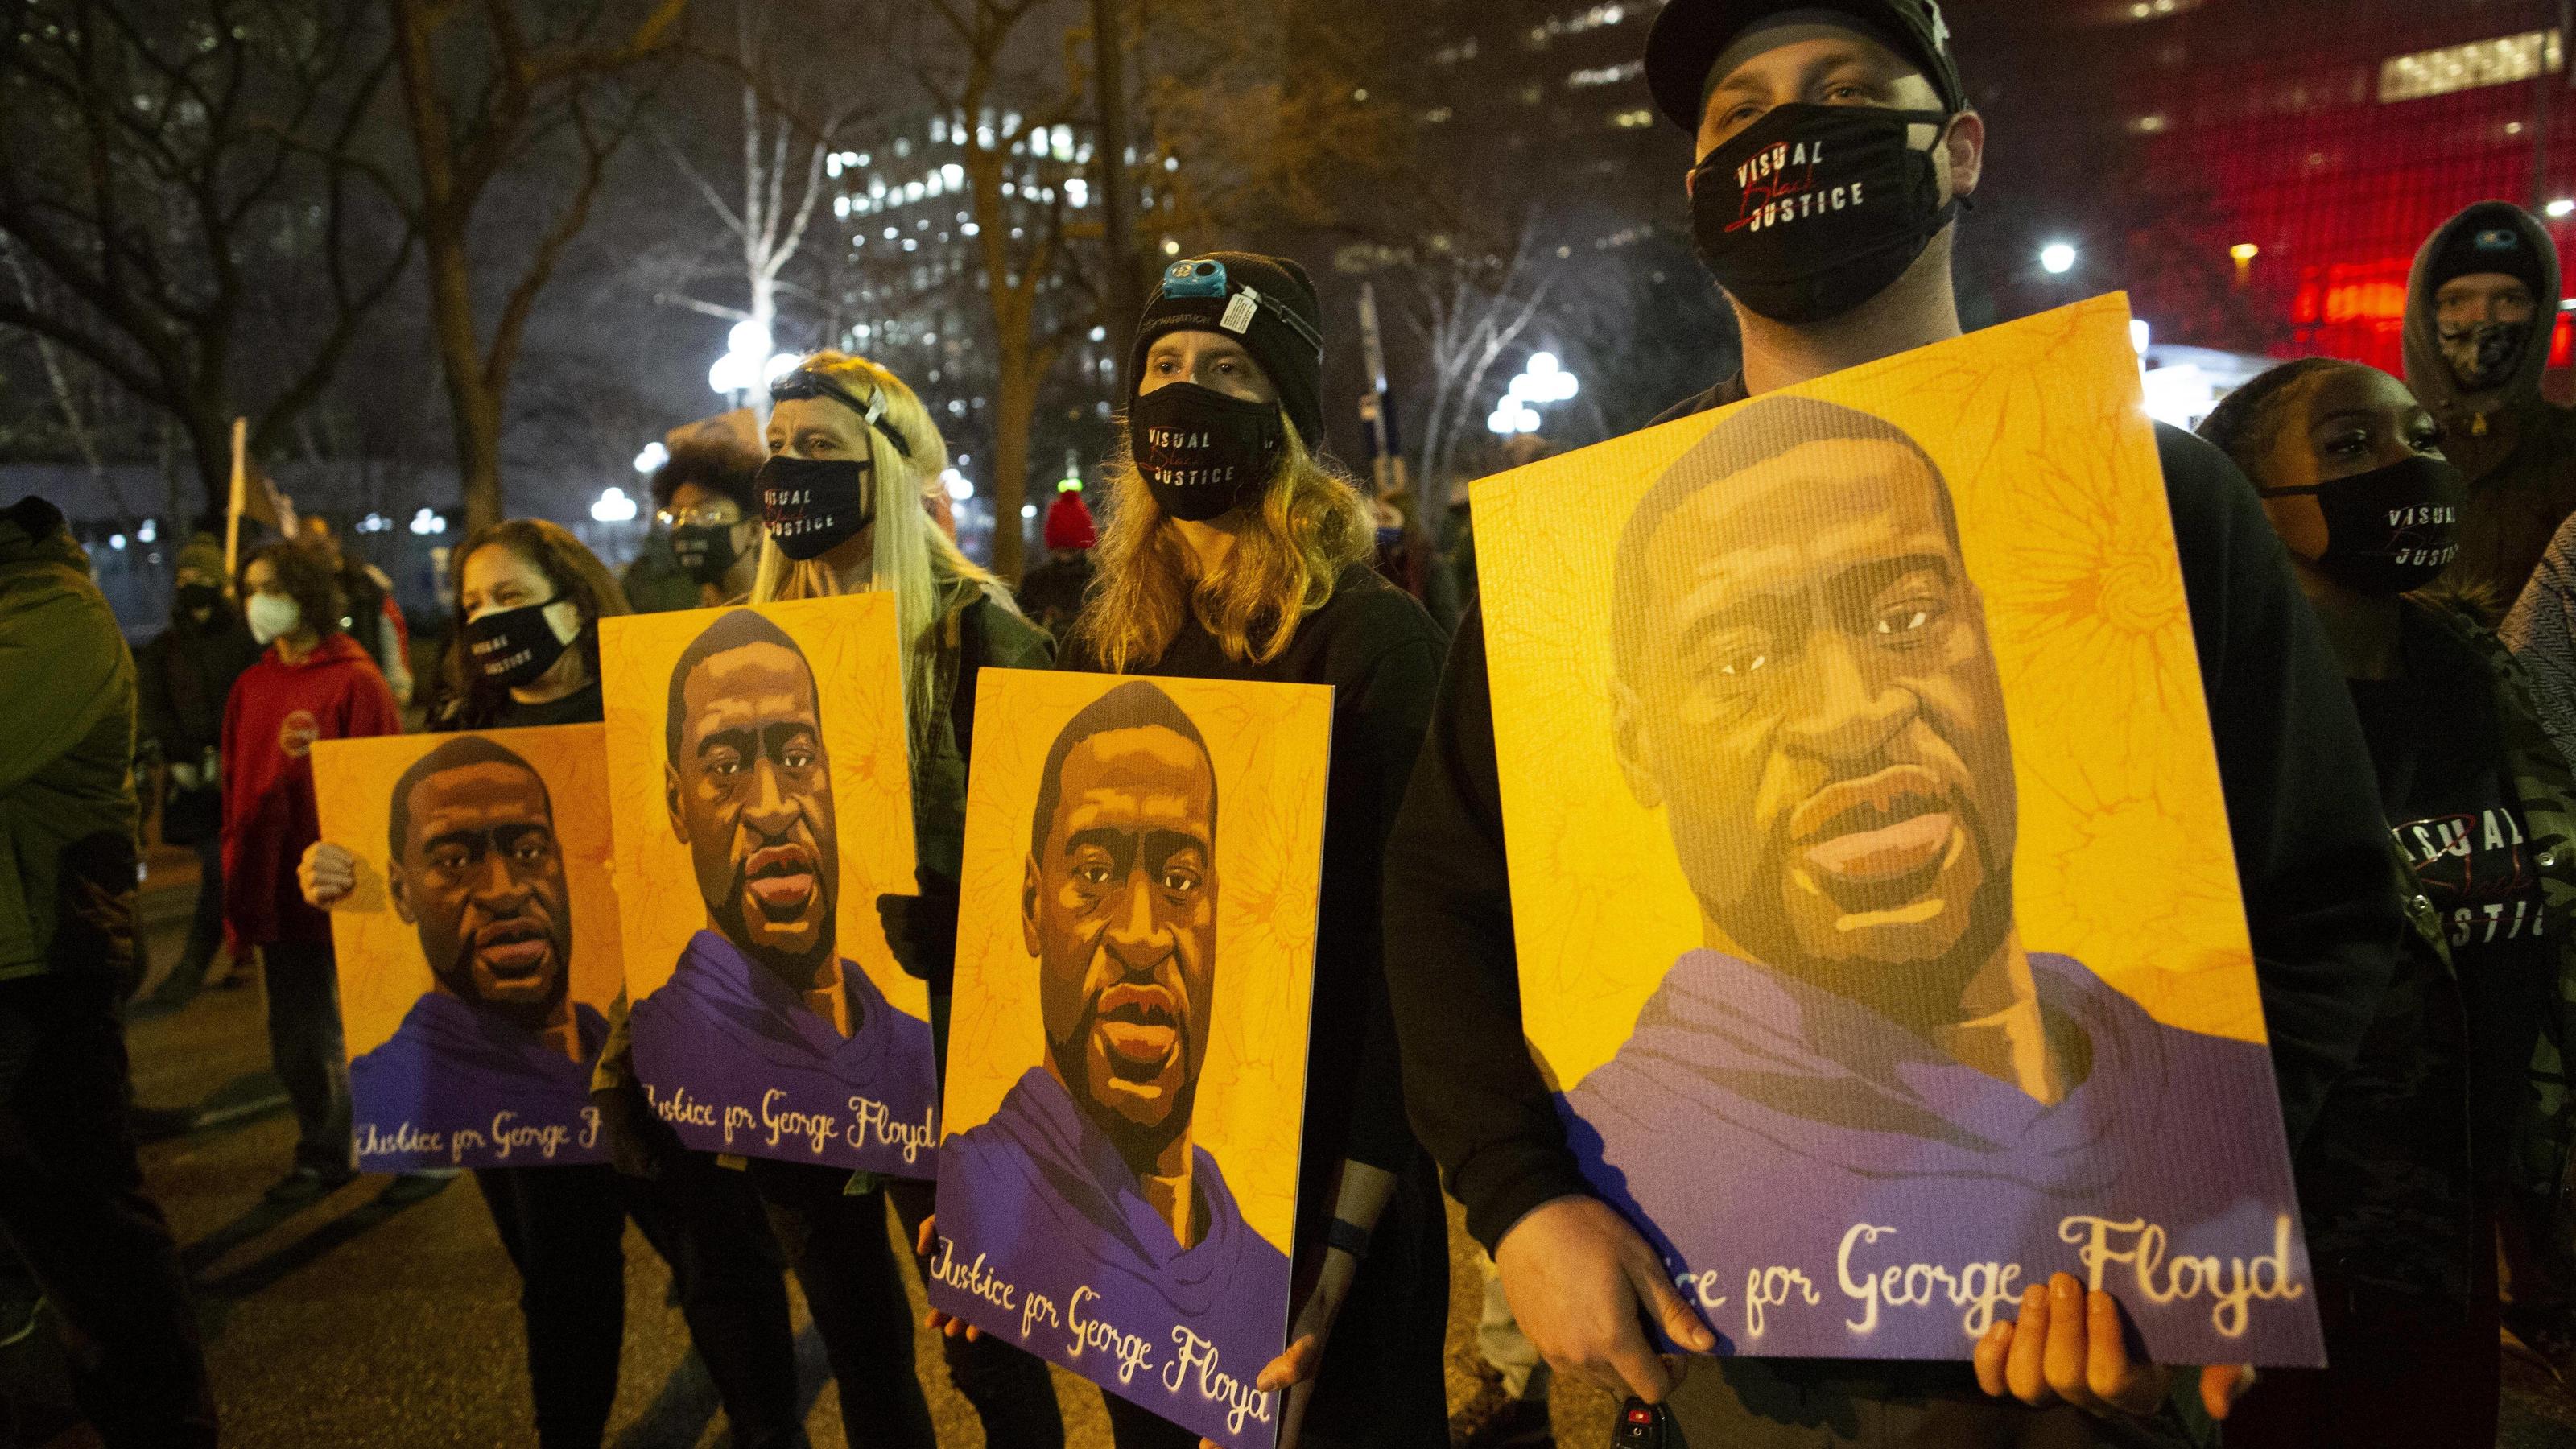 April 9, 2021, Minneapolis, Minnesota, USA: April 9, 2021-Minneapolis, Minnesota, USA: Demonstrators hold portraits of GEORGE FLOYD at a march against police brutality amid DEREK CHAUVIN s trial in Downtown Minneapolis. Minneapolis USA - ZUMAp201 202